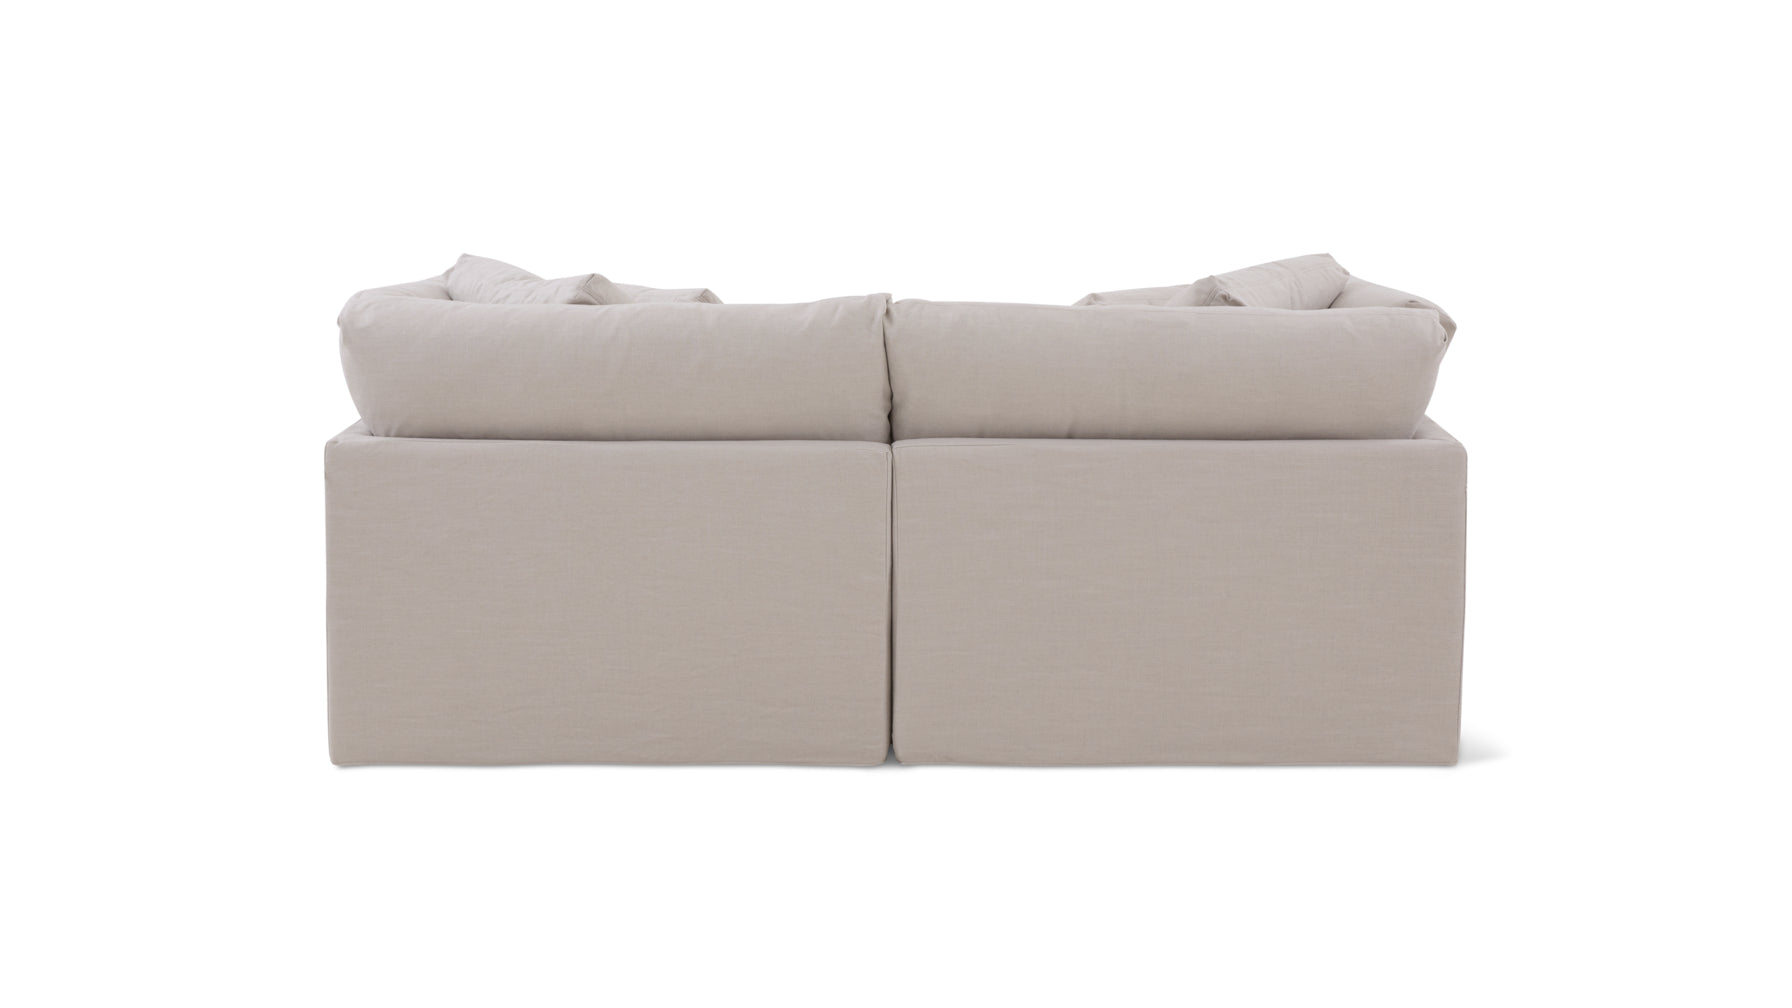 Get Together™ 3-Piece Modular Sectional, Large, Clay - Image 8